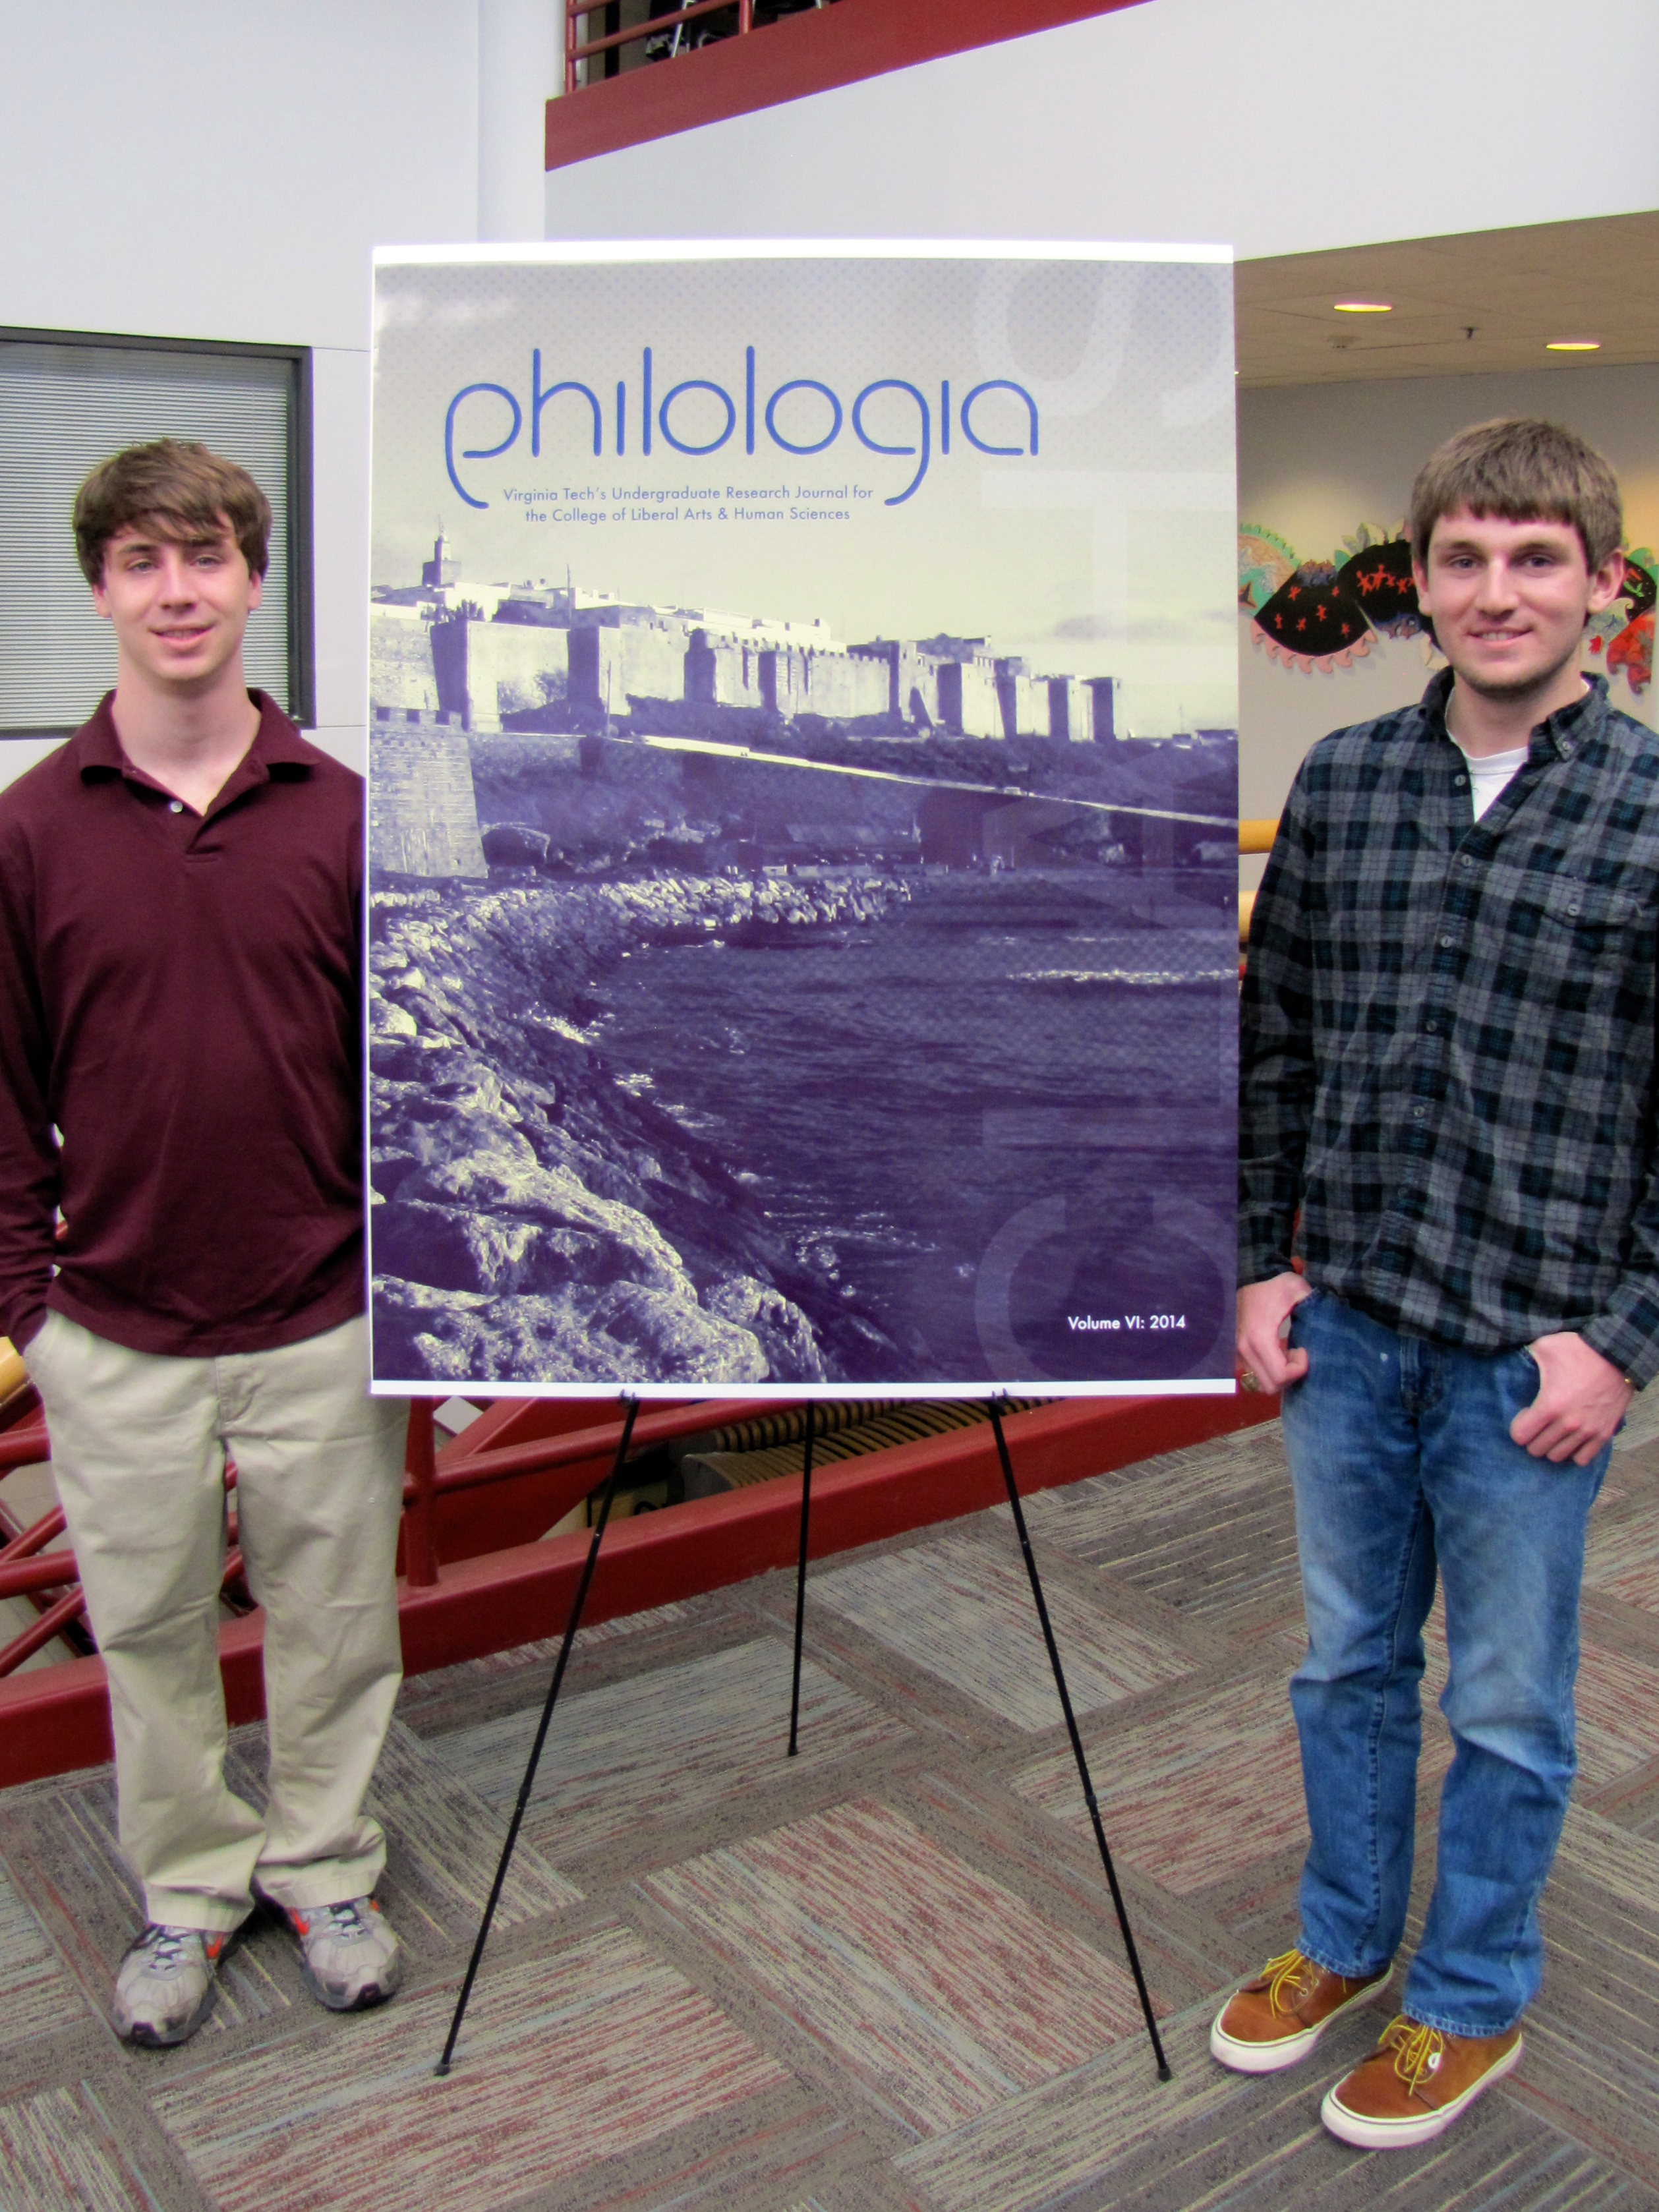 "Philologia" editors with cover image